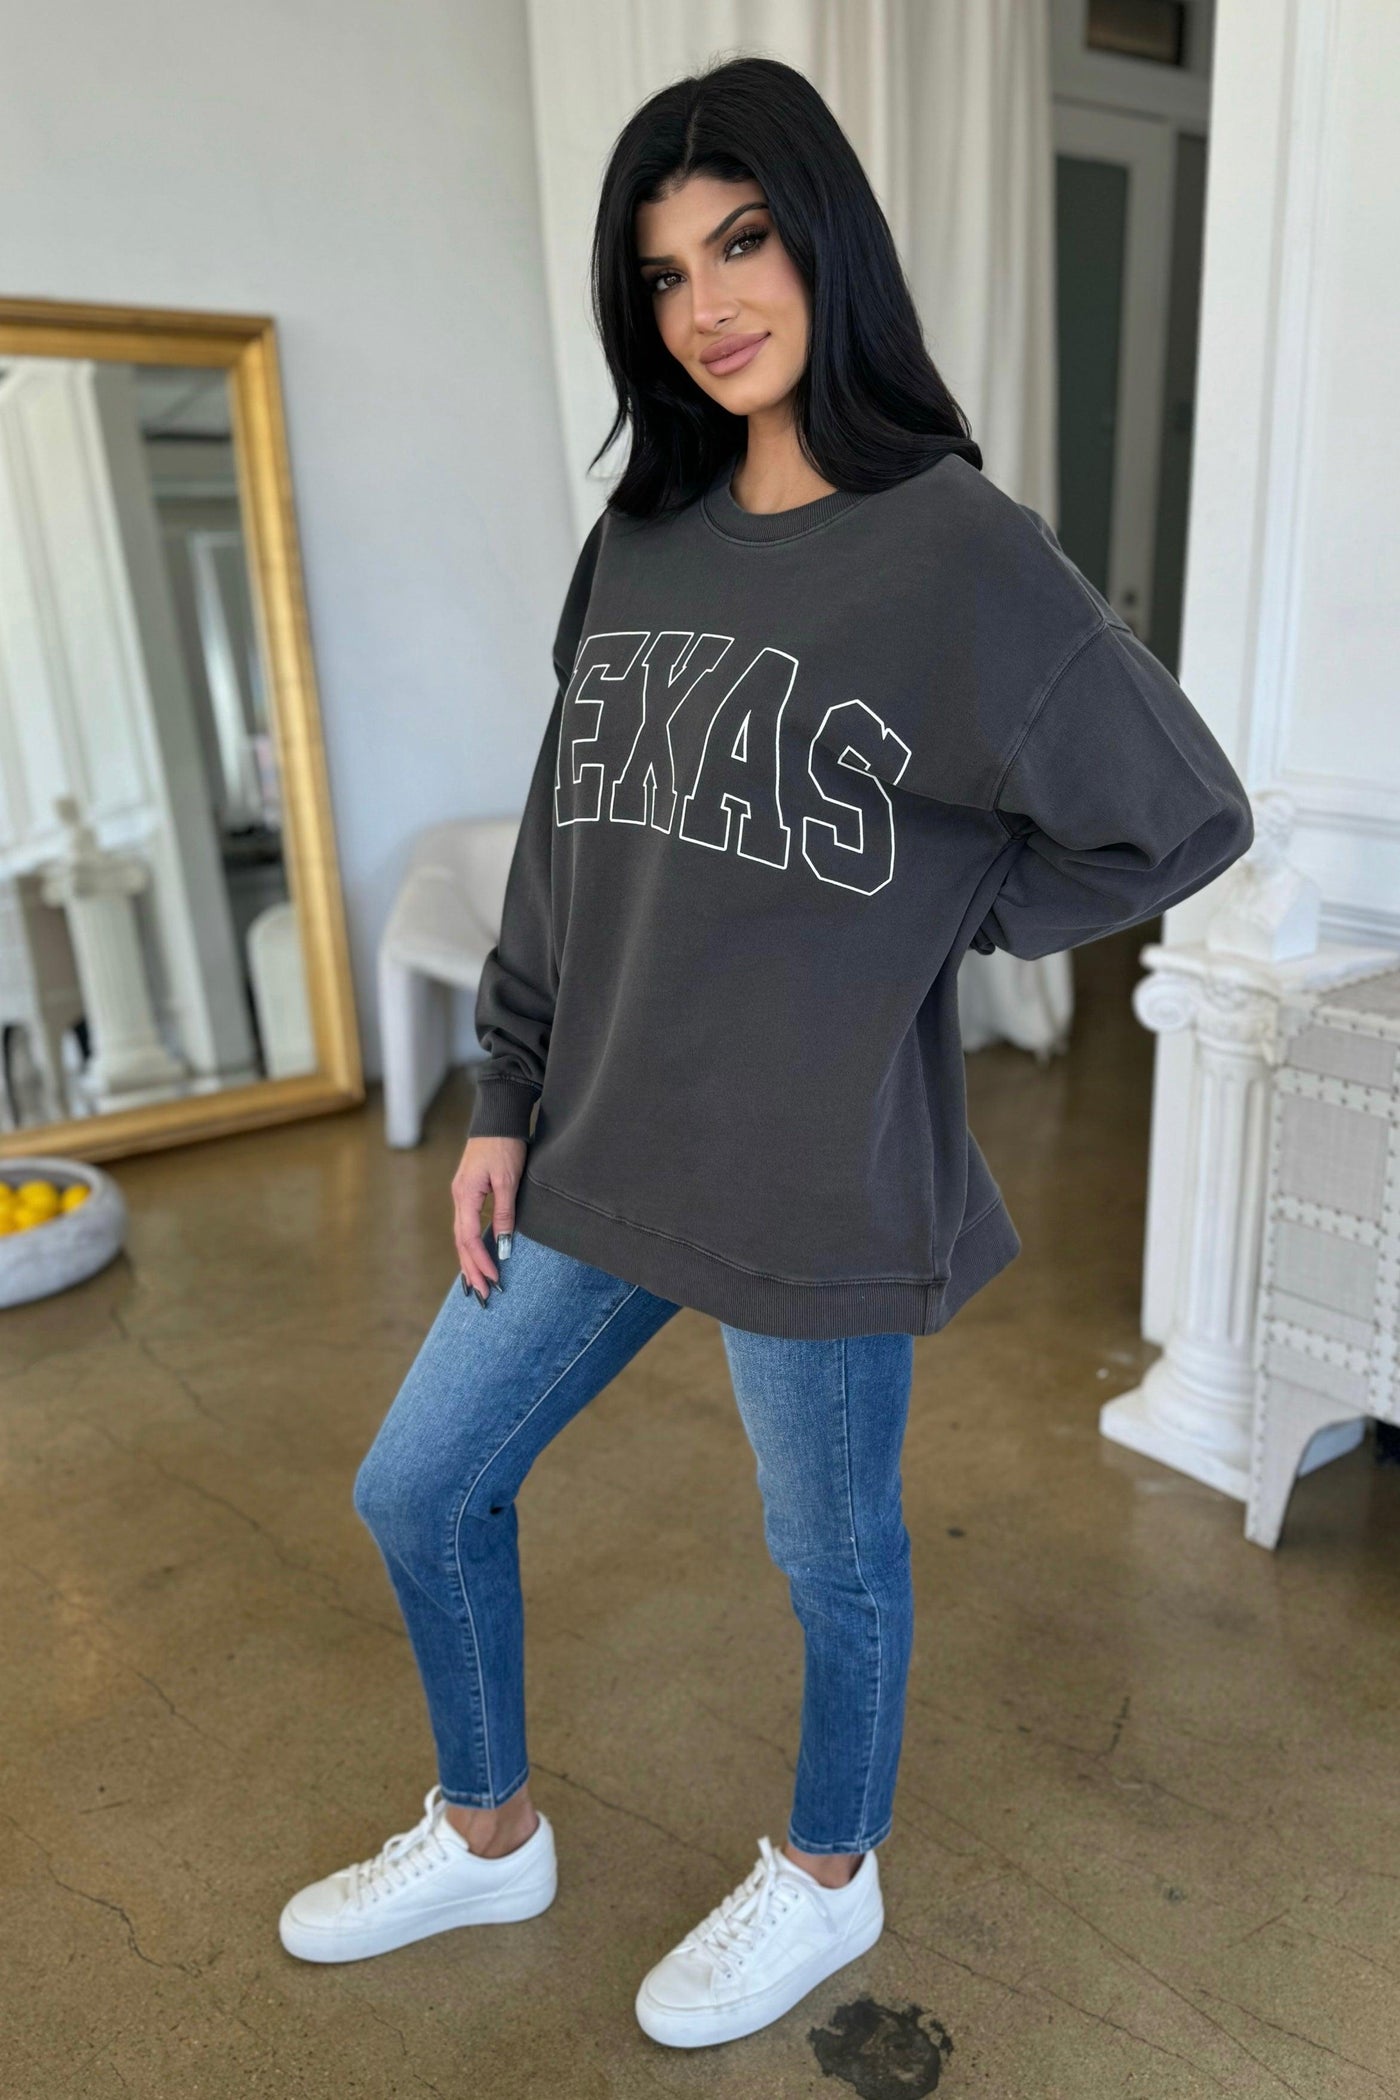 TEXAS PULLOVER , SWEATER , it’sNOMB. The Label , ATHLEISURE, ATHLETIC PULLOVER, COZY SWEATER, it's nomb, it's nomb the label, JESSICA NICKSON, LOUNGE WEAR, LOUNGEWEAR, MORGAN, PULLOVERS, sweater, sweaters, Texas, texas state pride, TEXAS SWEATER, TEXAS SWEATSHIRT , It's NOMB , itsnomb.com